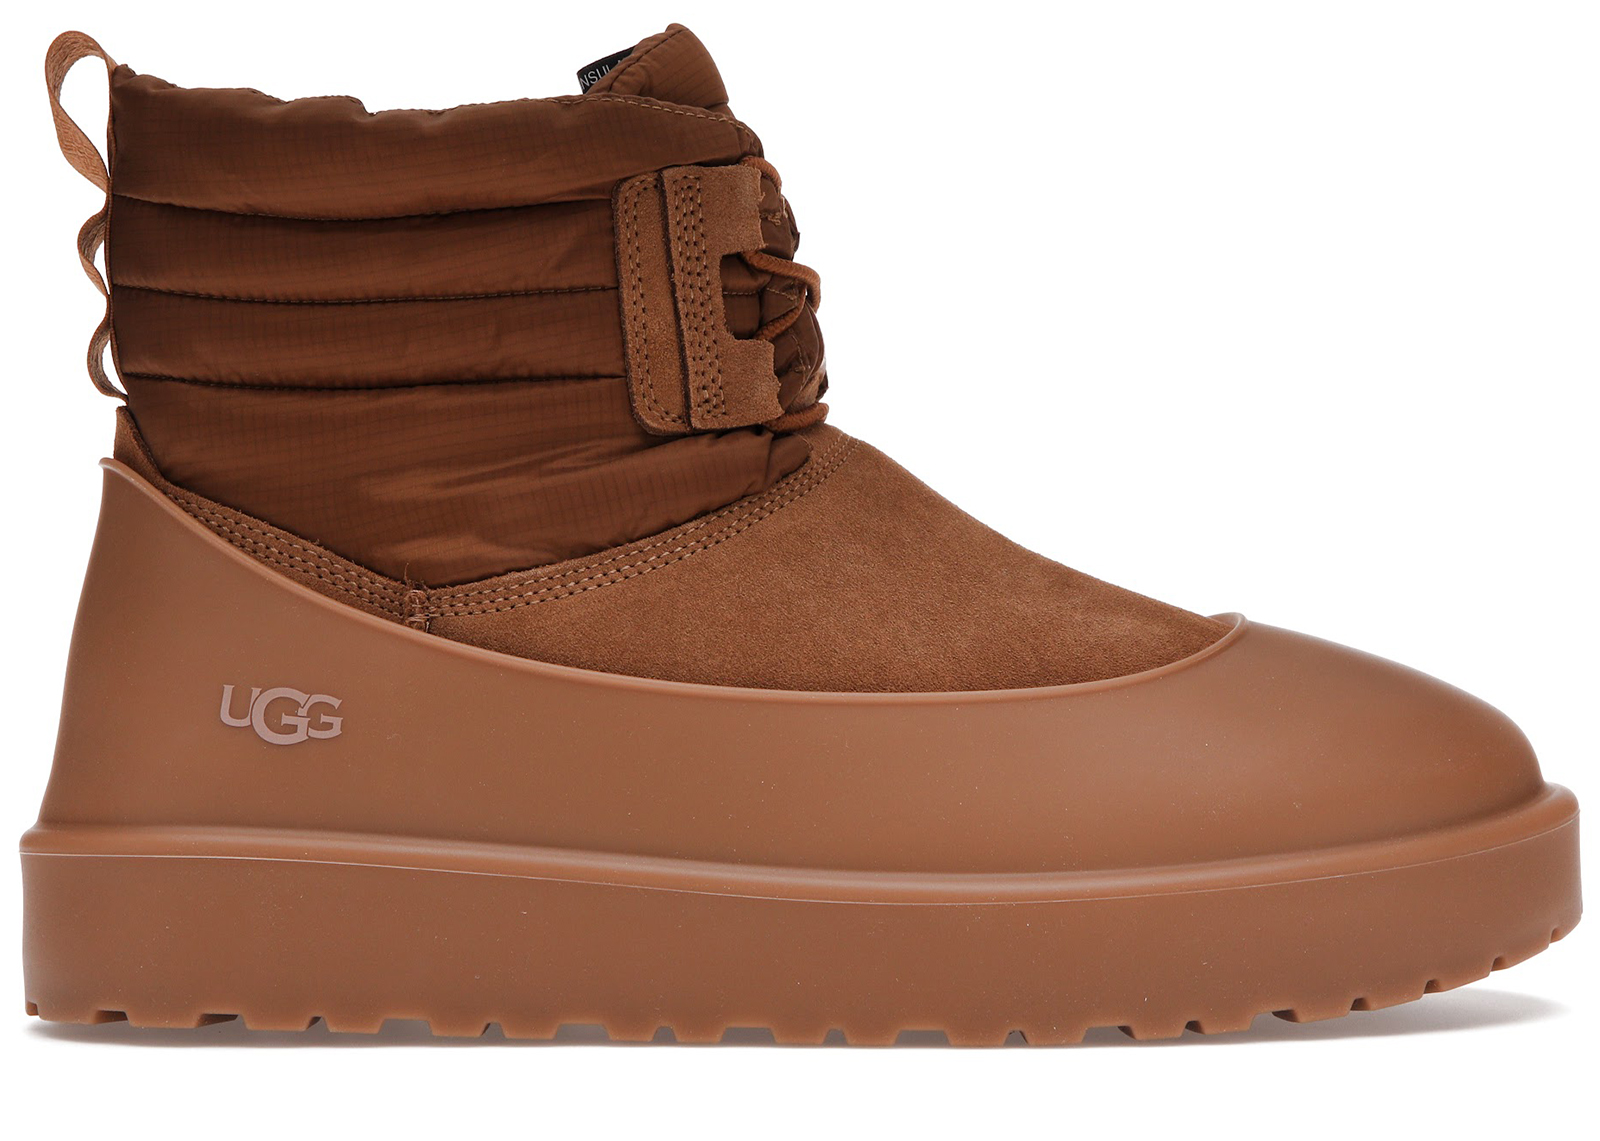 UGG Classic Mini Lace-Up Weather Boot Chestnut Men's - 1120849-CHE